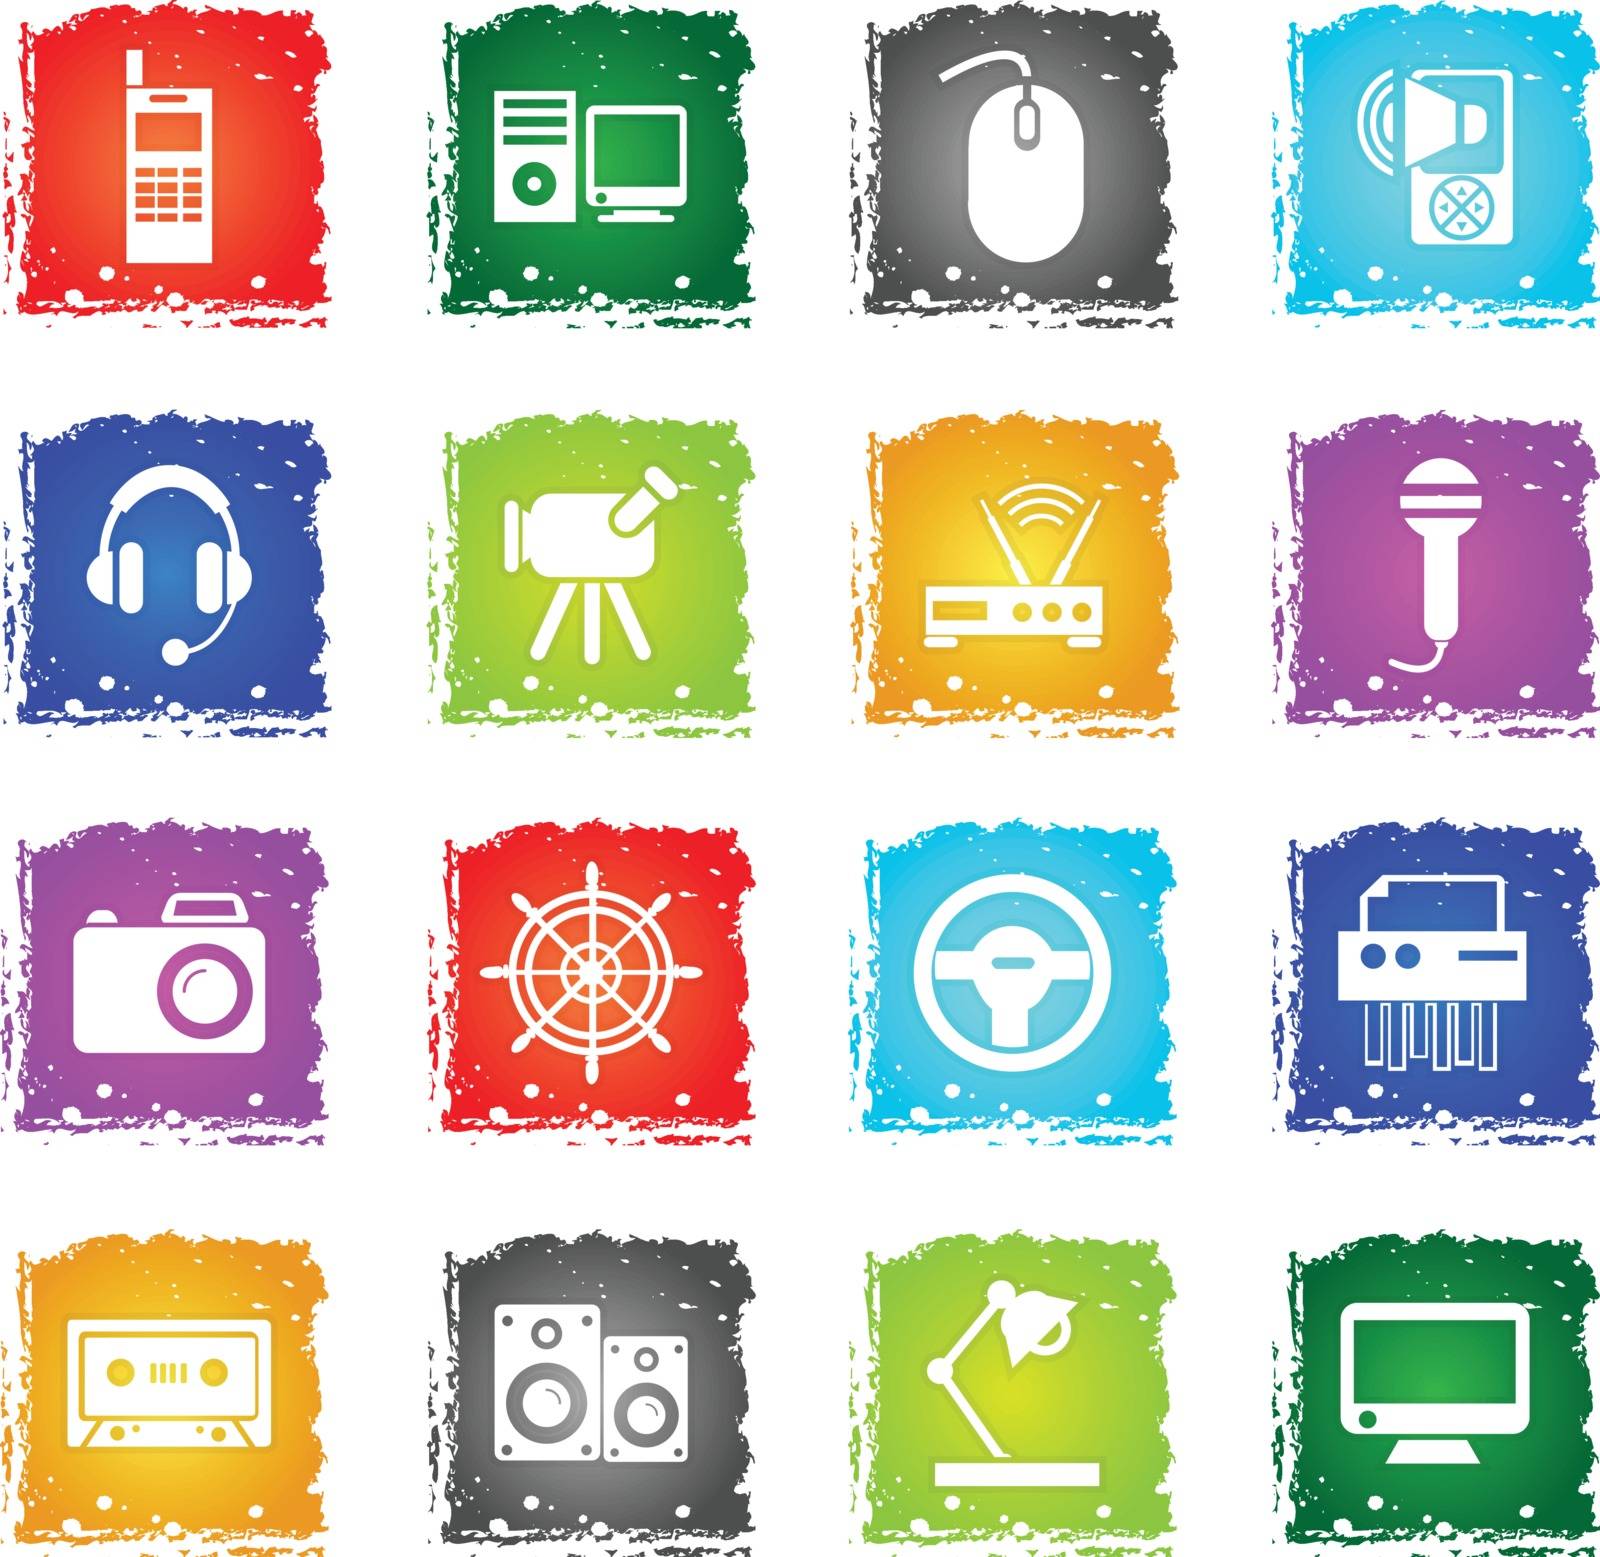 device vector web icons in grunge style for user interface design